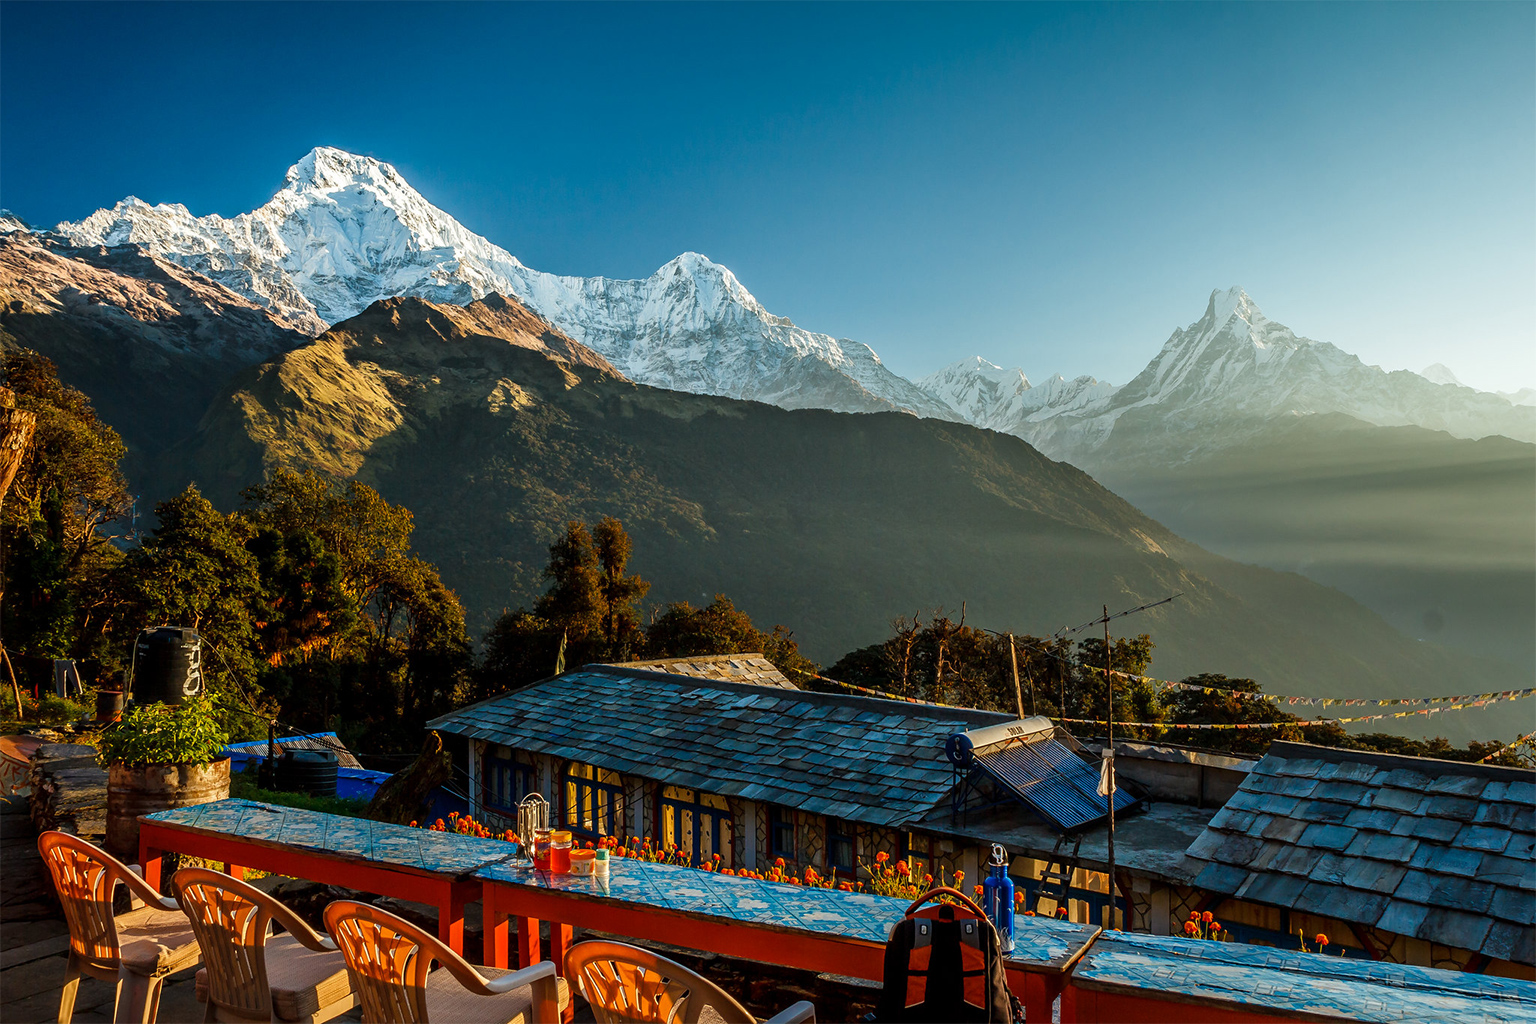 A guesthouse in the Annapurna region.